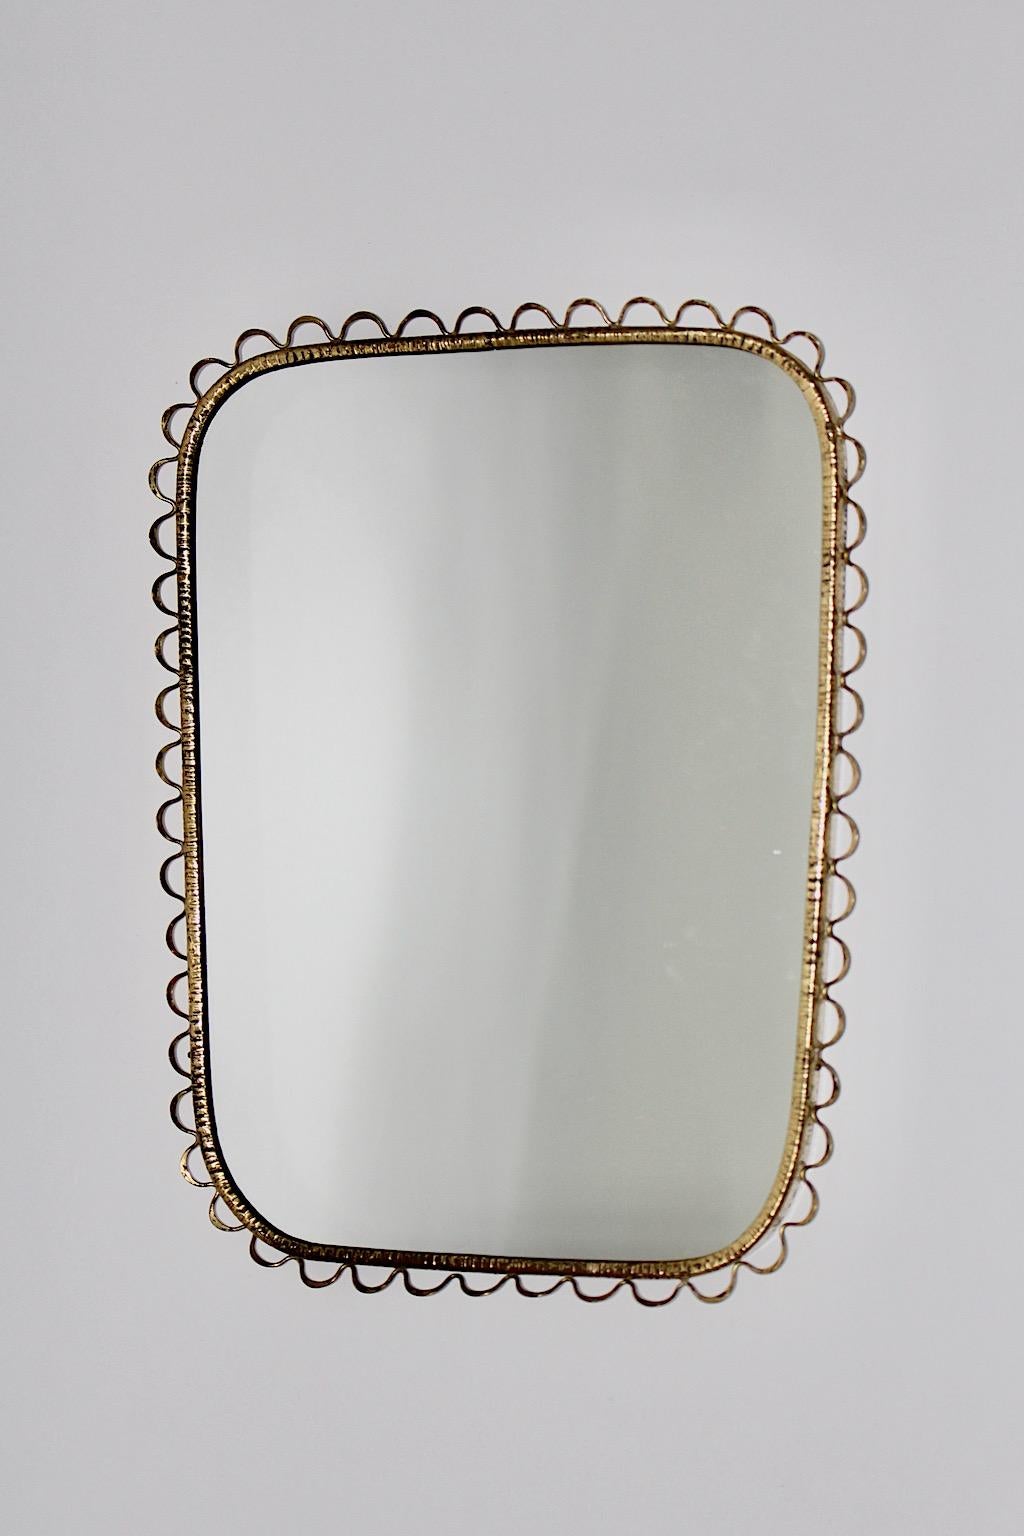 Italian Mid-Century Modern Vintage Rectangular Brass Wall Mirror with Loops 1950s Italy For Sale